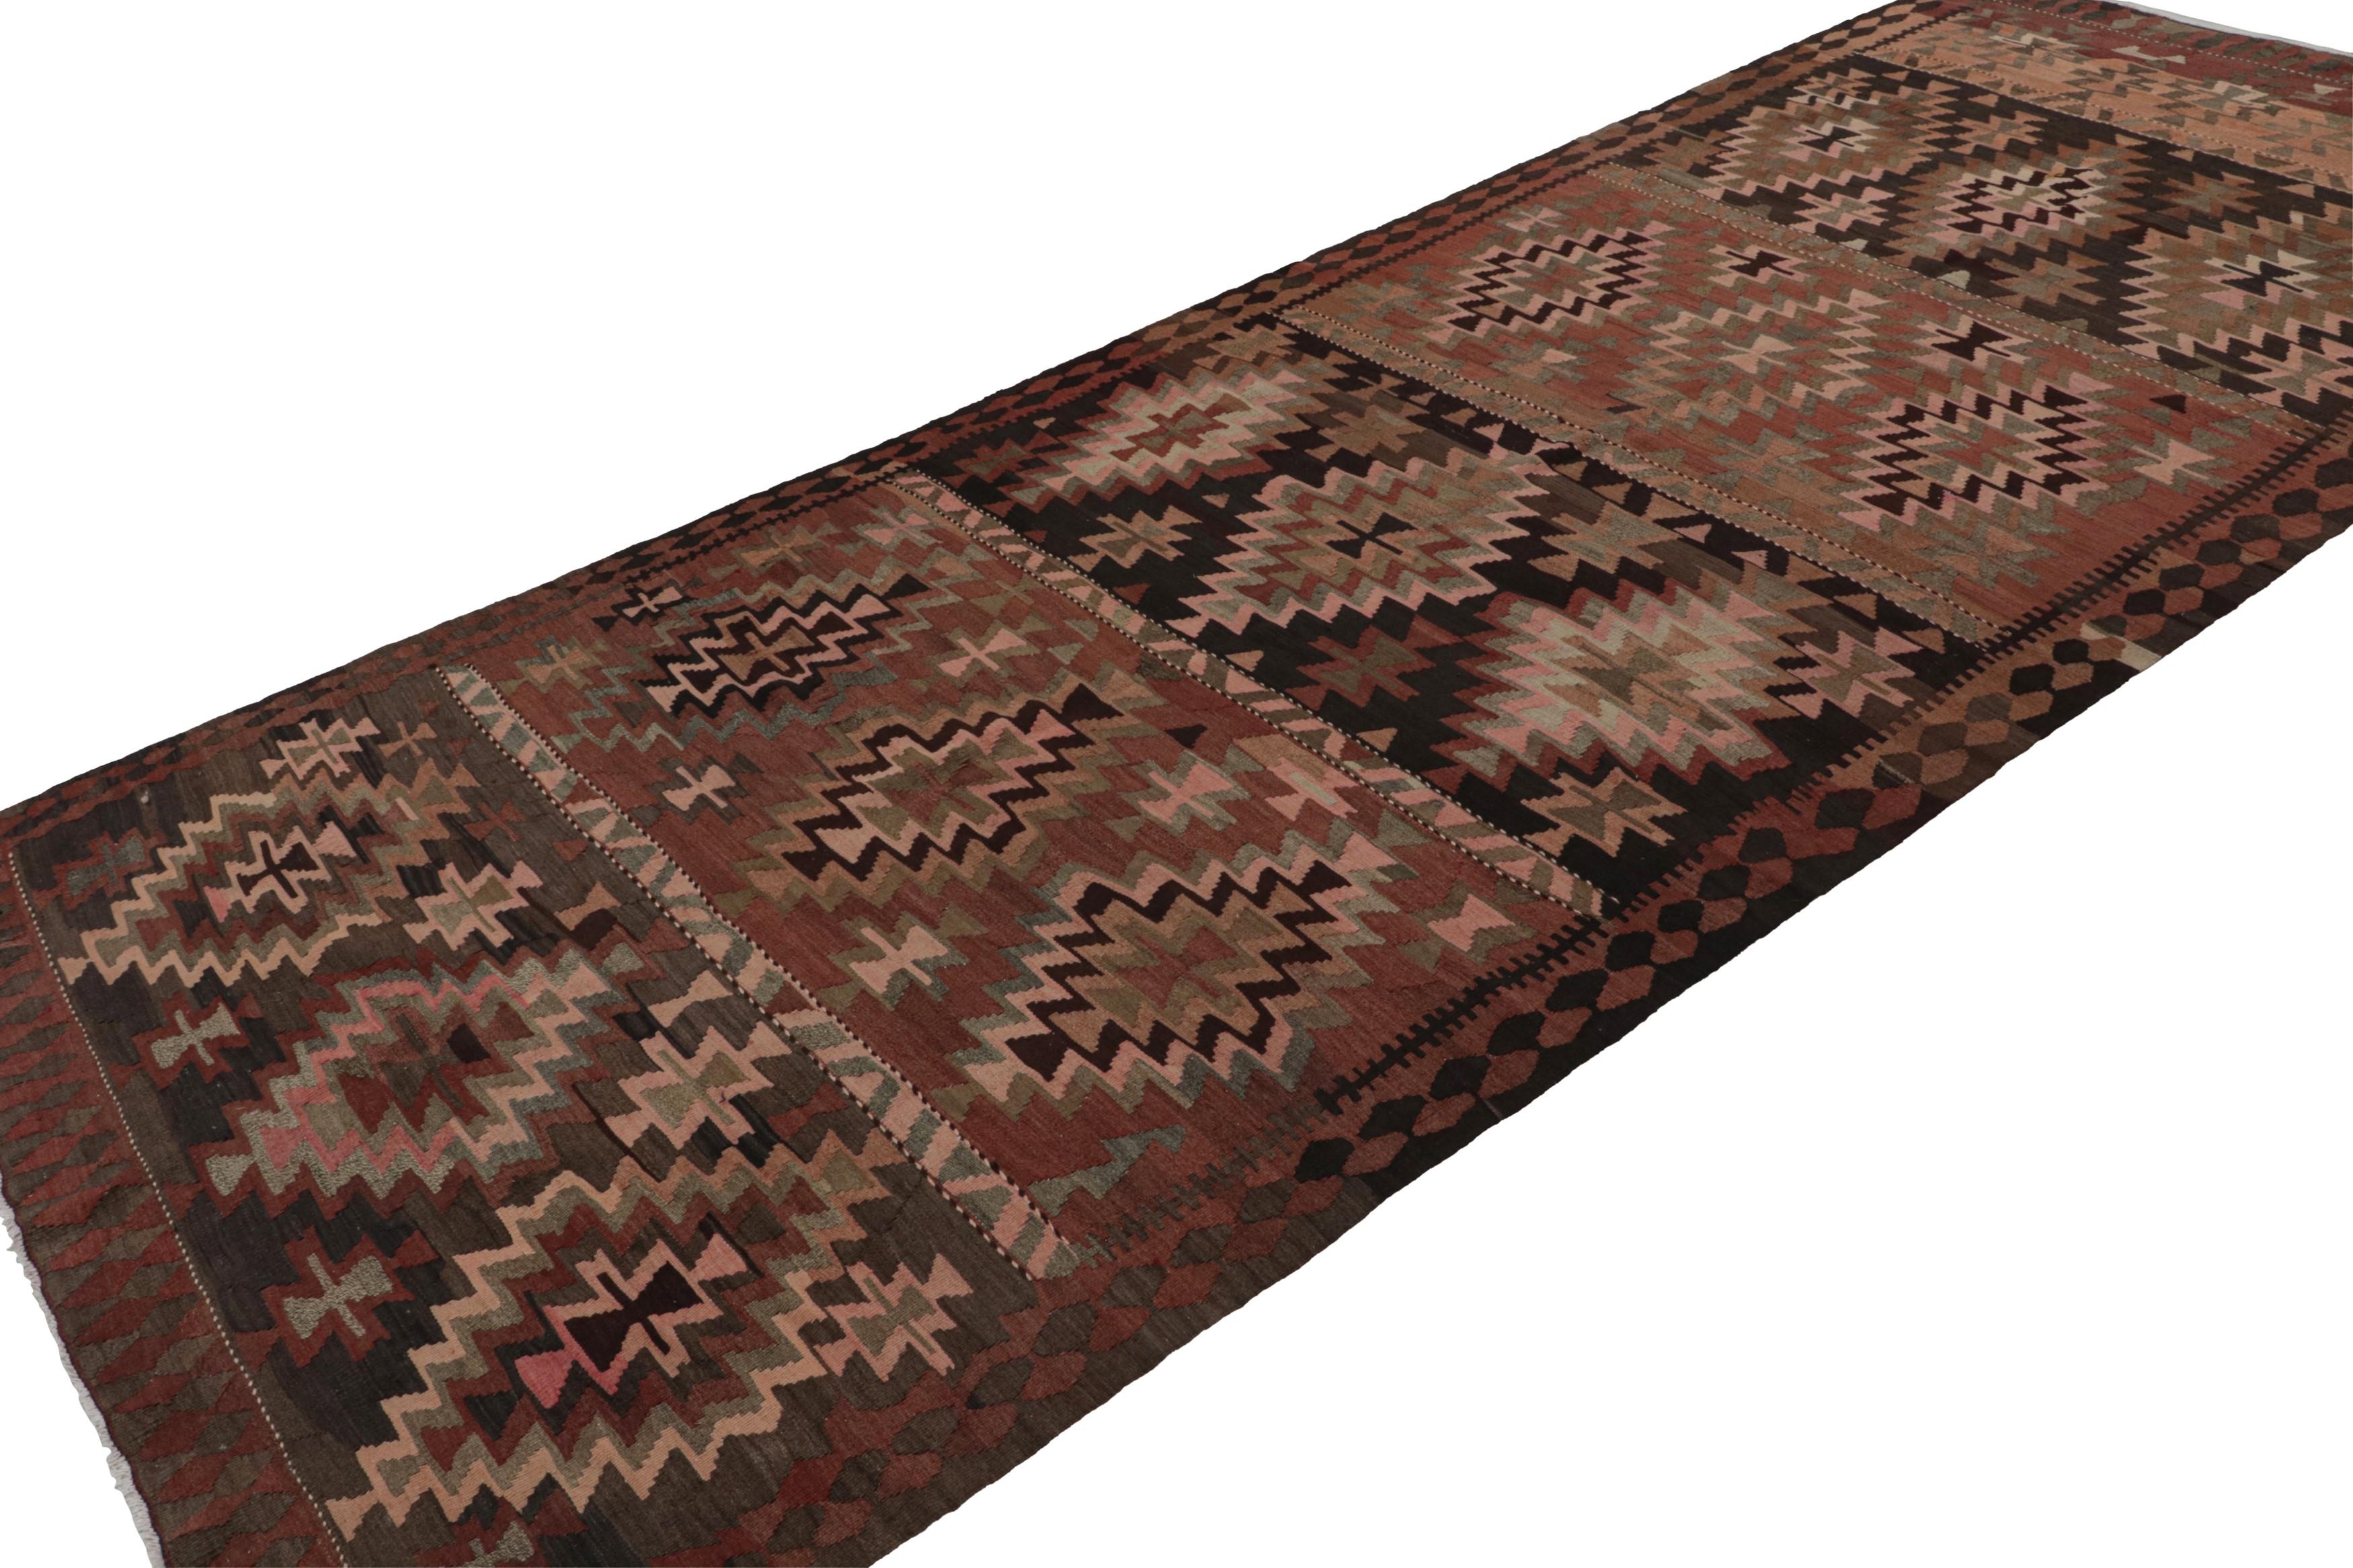 Handwoven in wool, circa 1950-1960, this 6x14 vintage Afghan tribal kilim and gallery runner rug features a minimal palette of rich brown and pink colors and vibrant rust and green accents. 

On the design: 

Connoisseurs will appreciate this rug as